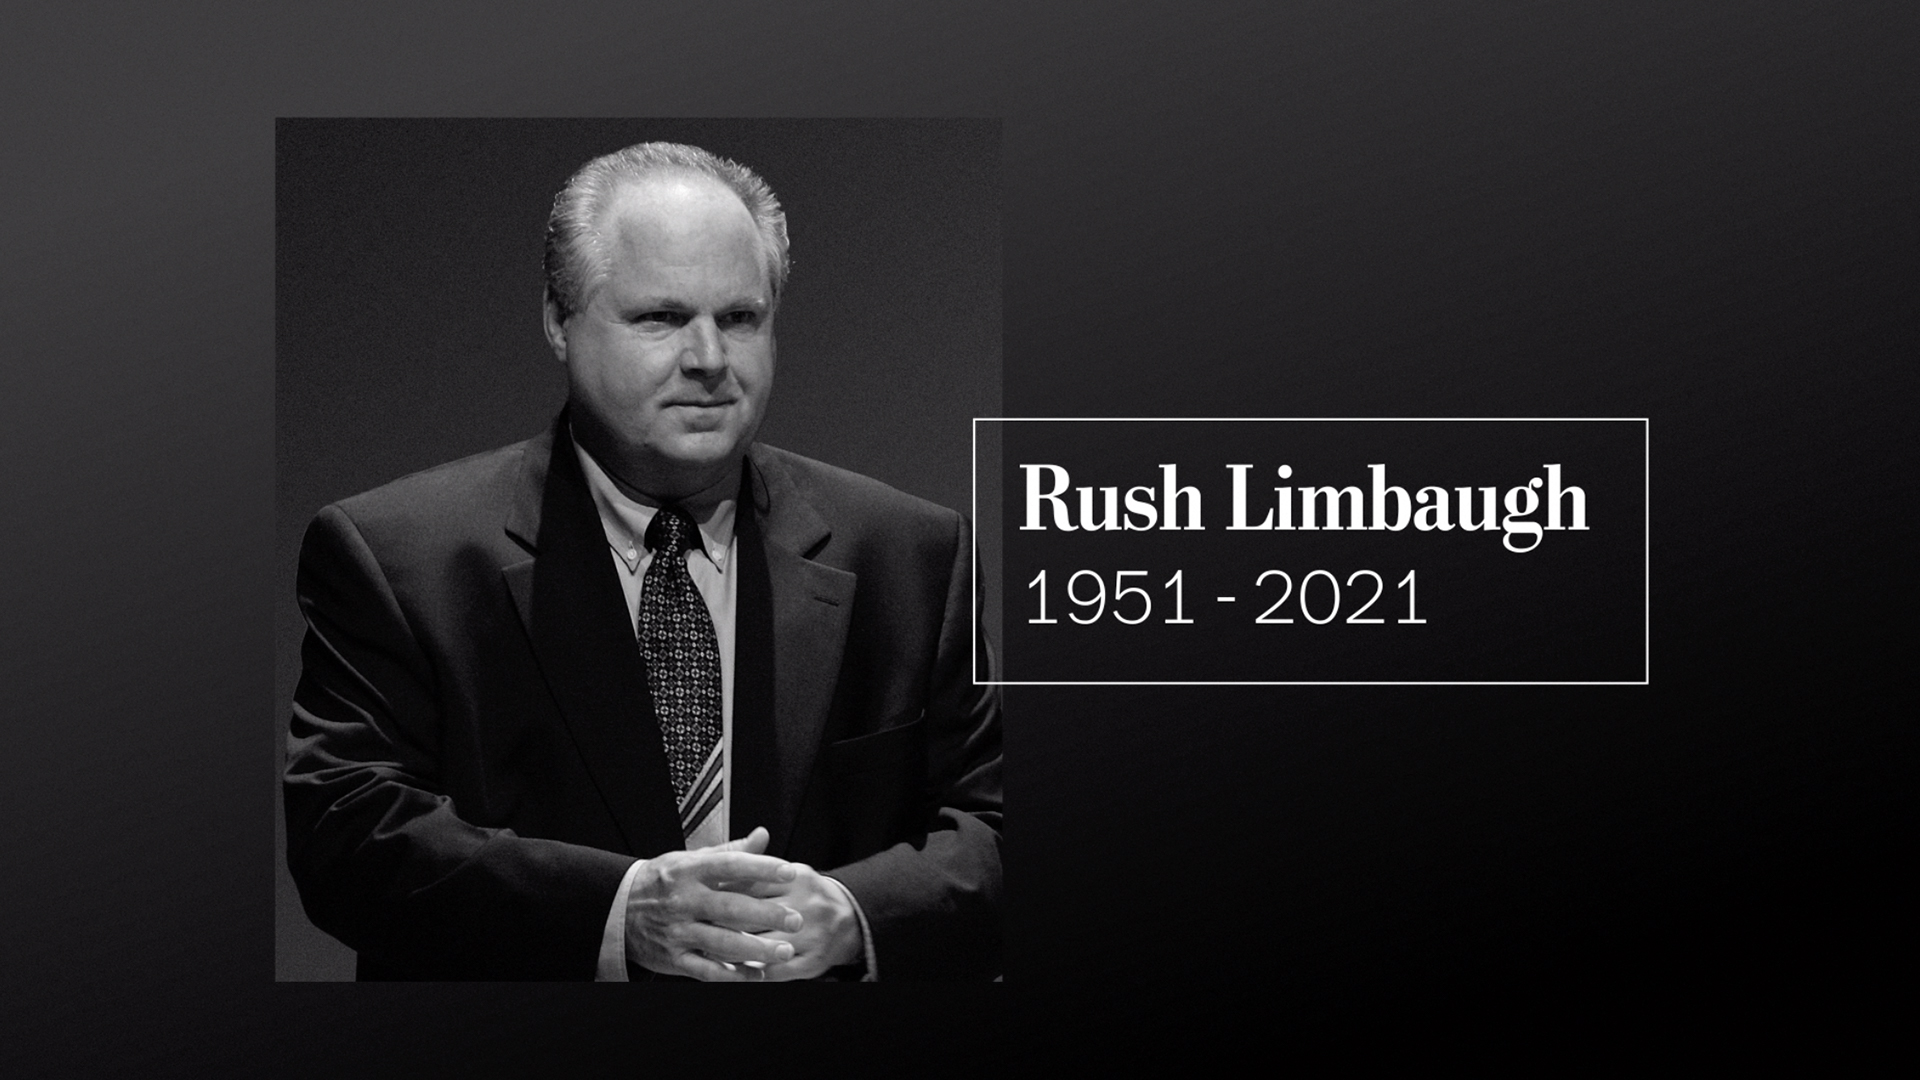 Rush Limbaugh, conservative radio provocateur and cultural phenomenon, dies at 70